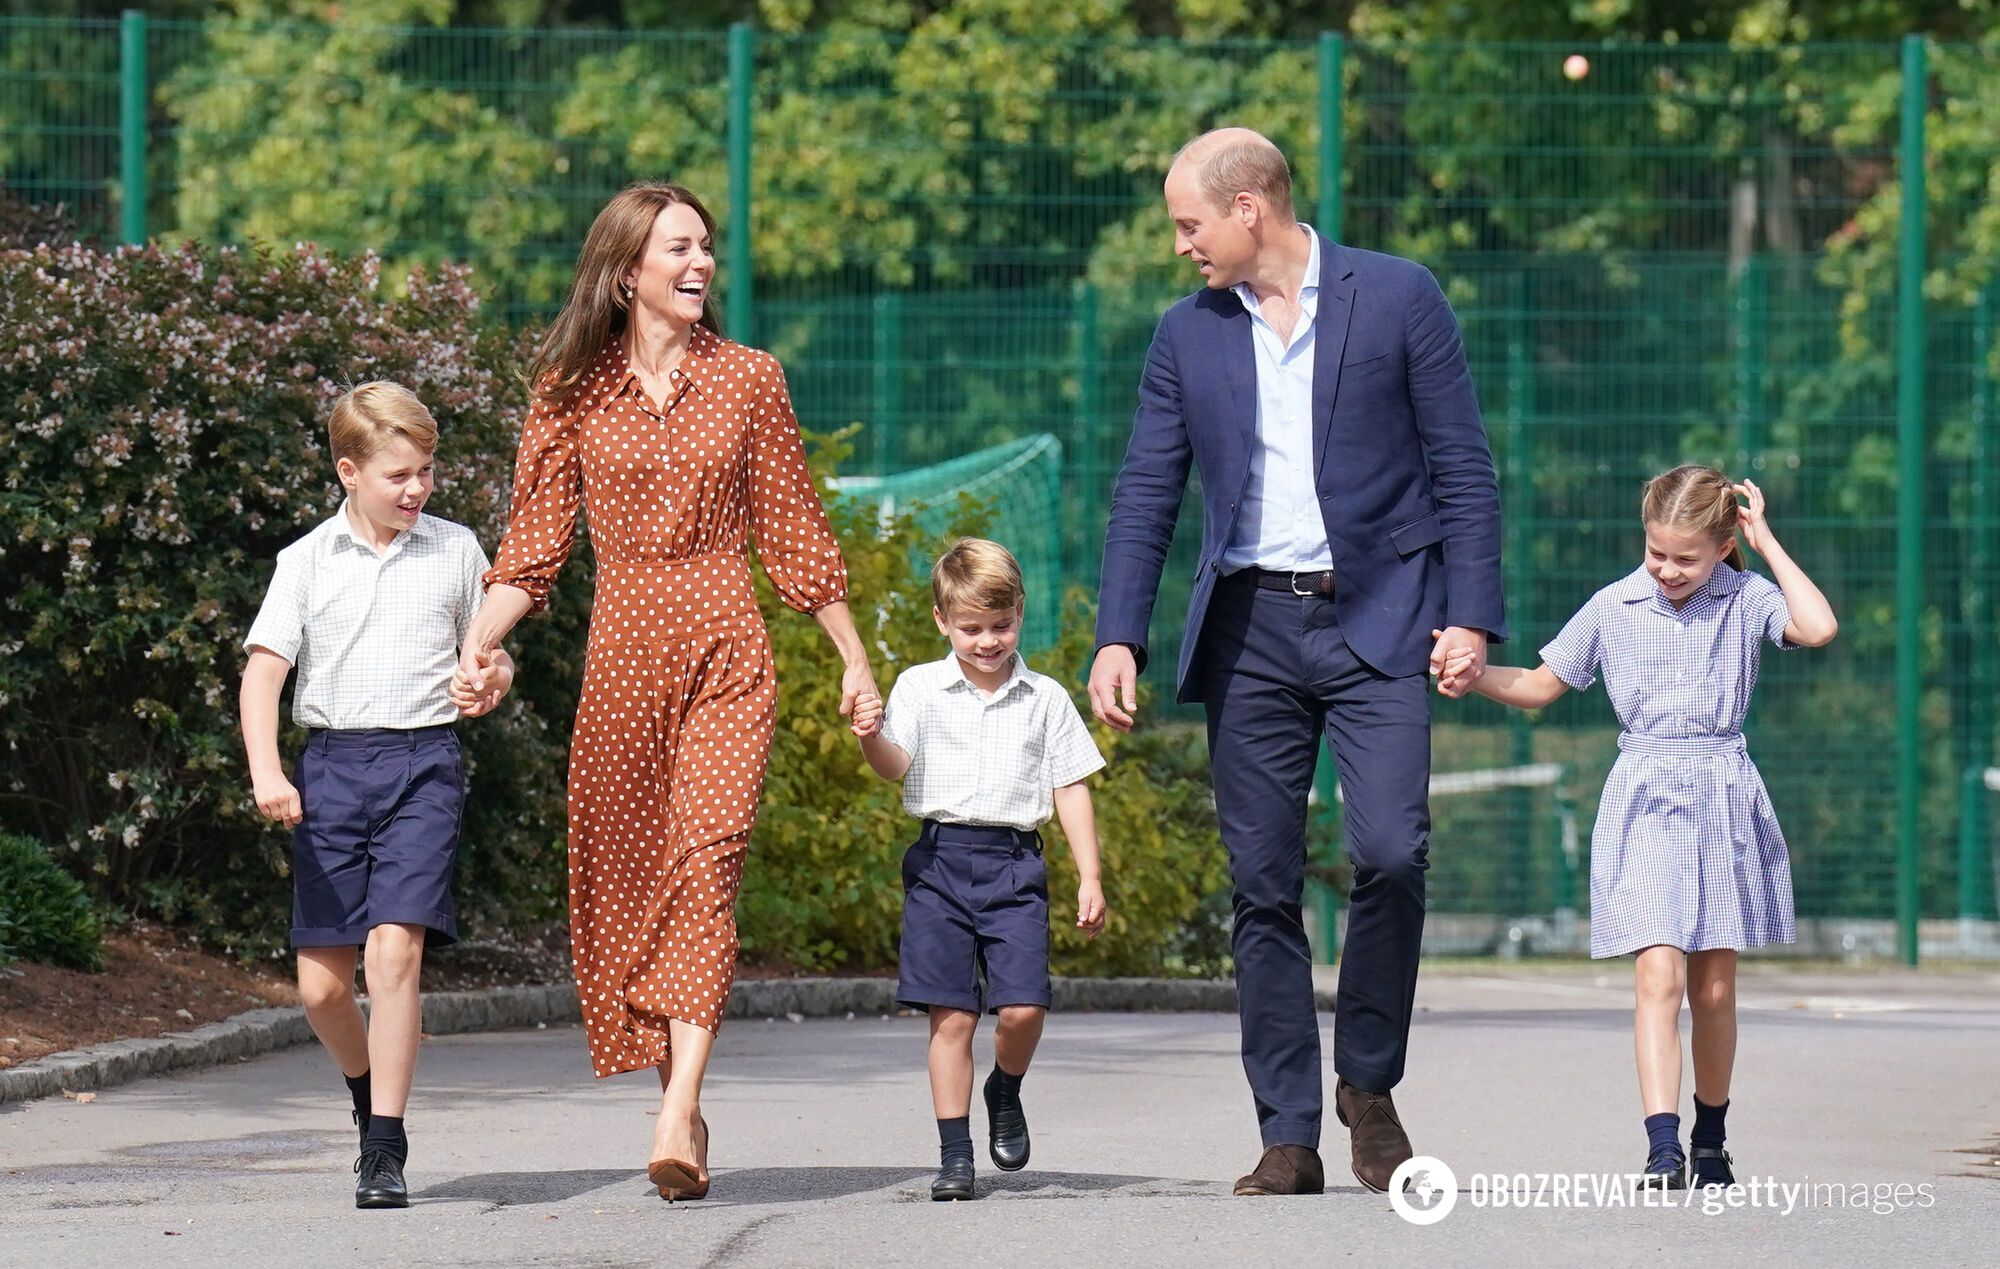 It became known why Kate Middleton does not go out after abdominal surgery